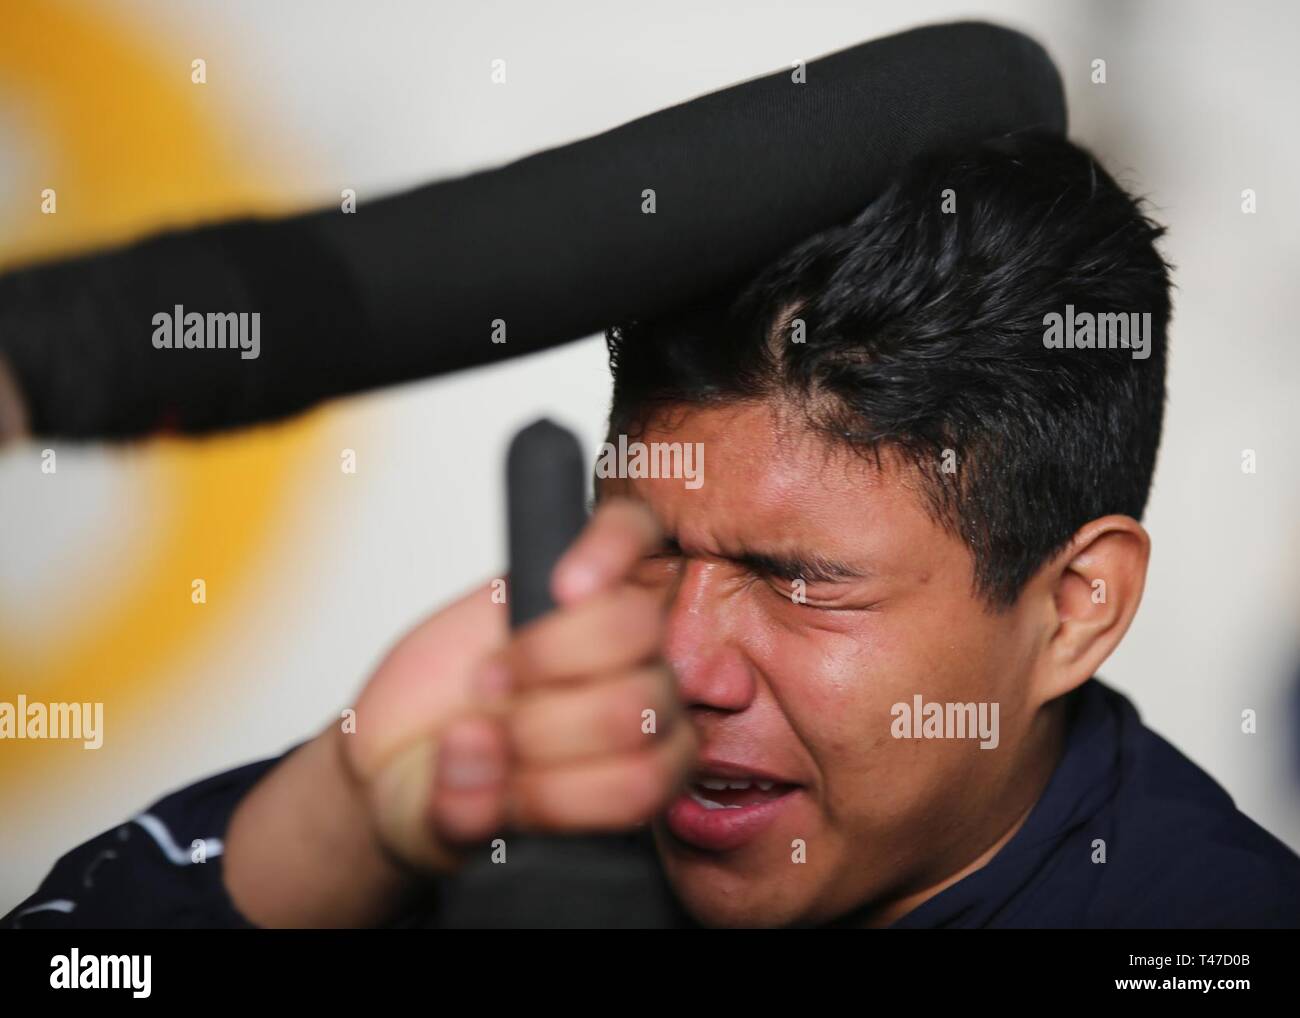 OCEAN (Mar. 15, 2019) Logistics Specialist Seaman Apprentice Luis Castillorojas tries to defend himself against his mock attacker during an oleoresin capsicum (OC)  course aboard the multipurpose amphibious assault ship USS Bataan (LHD 5) The ship is underway conducting sea trials. Stock Photo